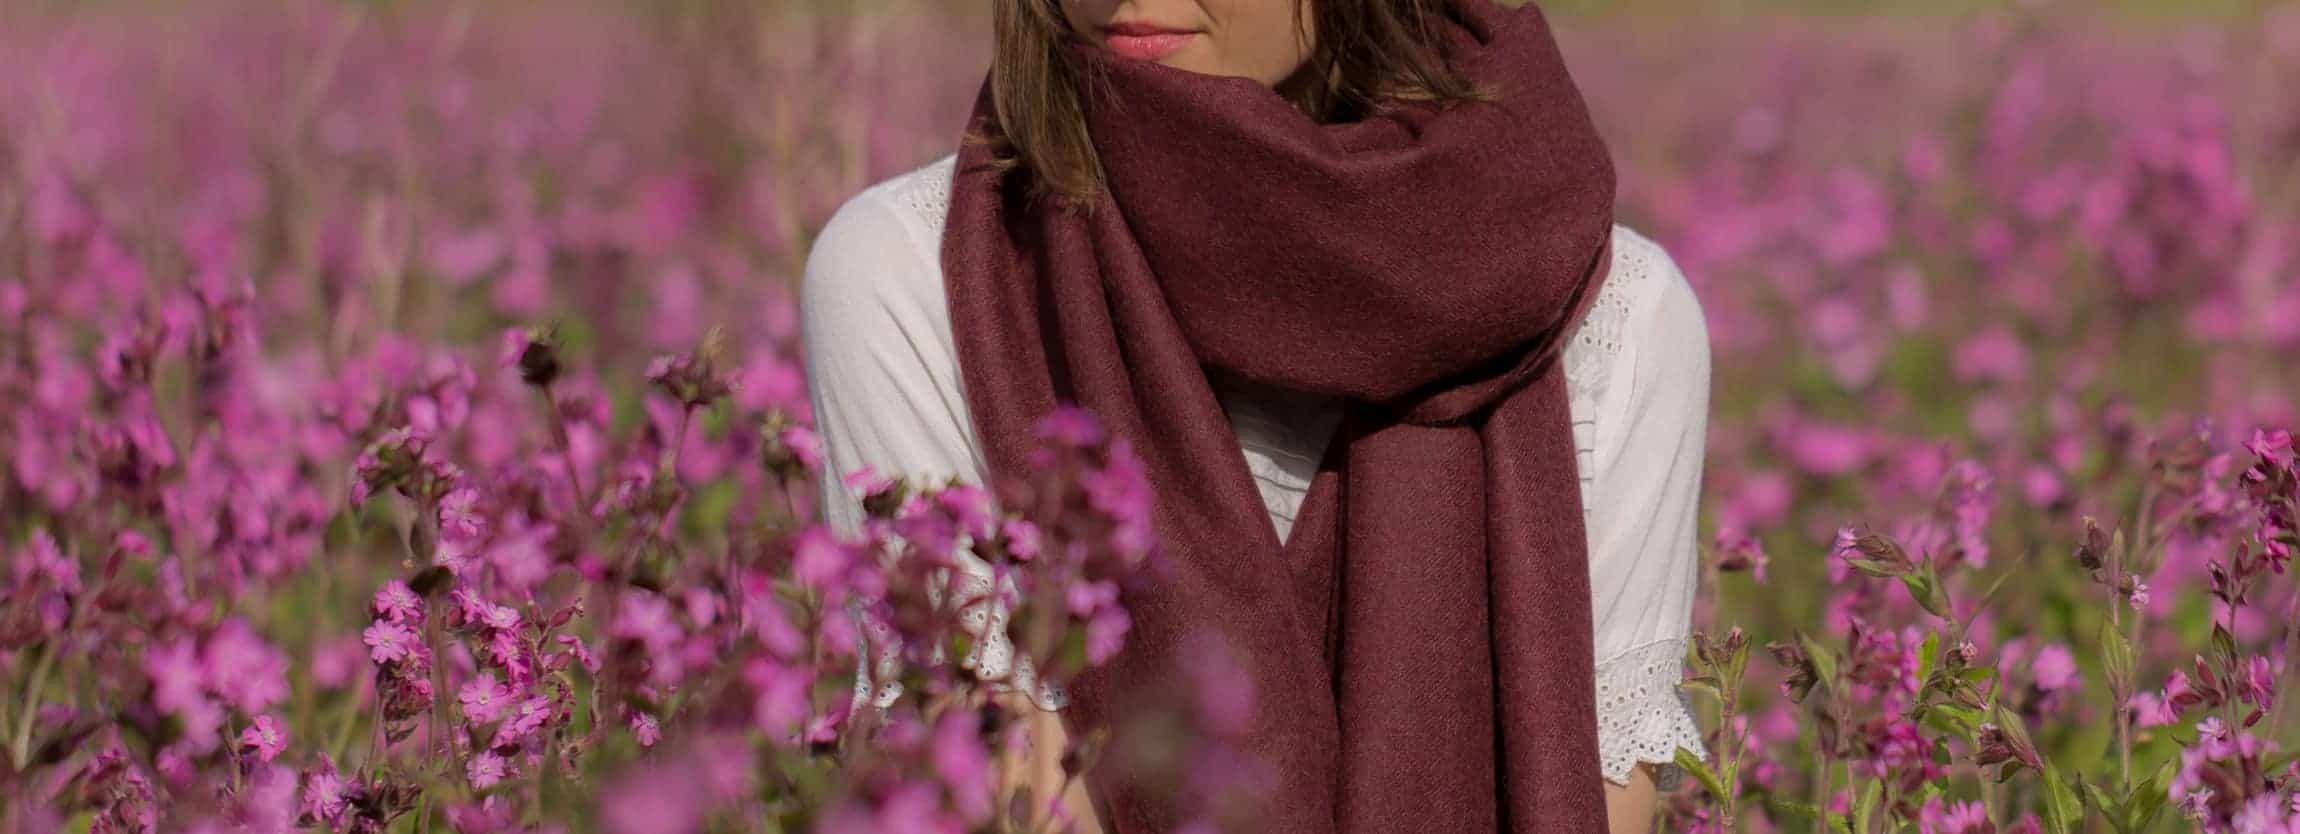 the-best-quality-scarves-shawls-wraps-made-from-baby-alpaca-wool-fibre